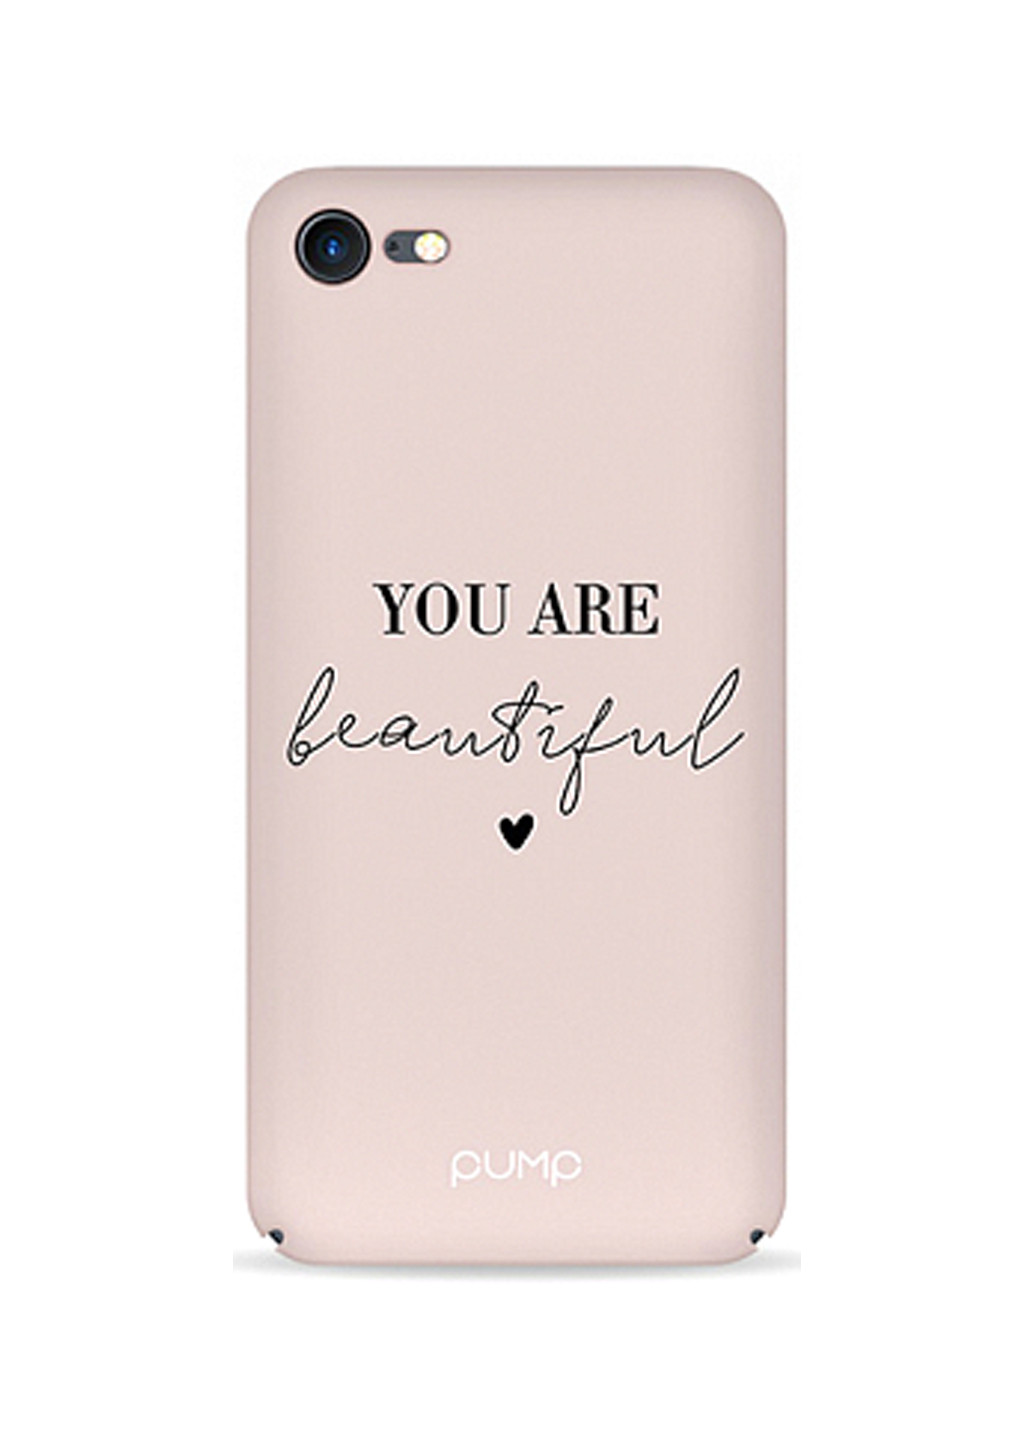 Чехол Tender Touch Case for iPhone 8/7 You Are Beautiful Pump tender touch case для iphone 8/7 you are beautiful (136994000)